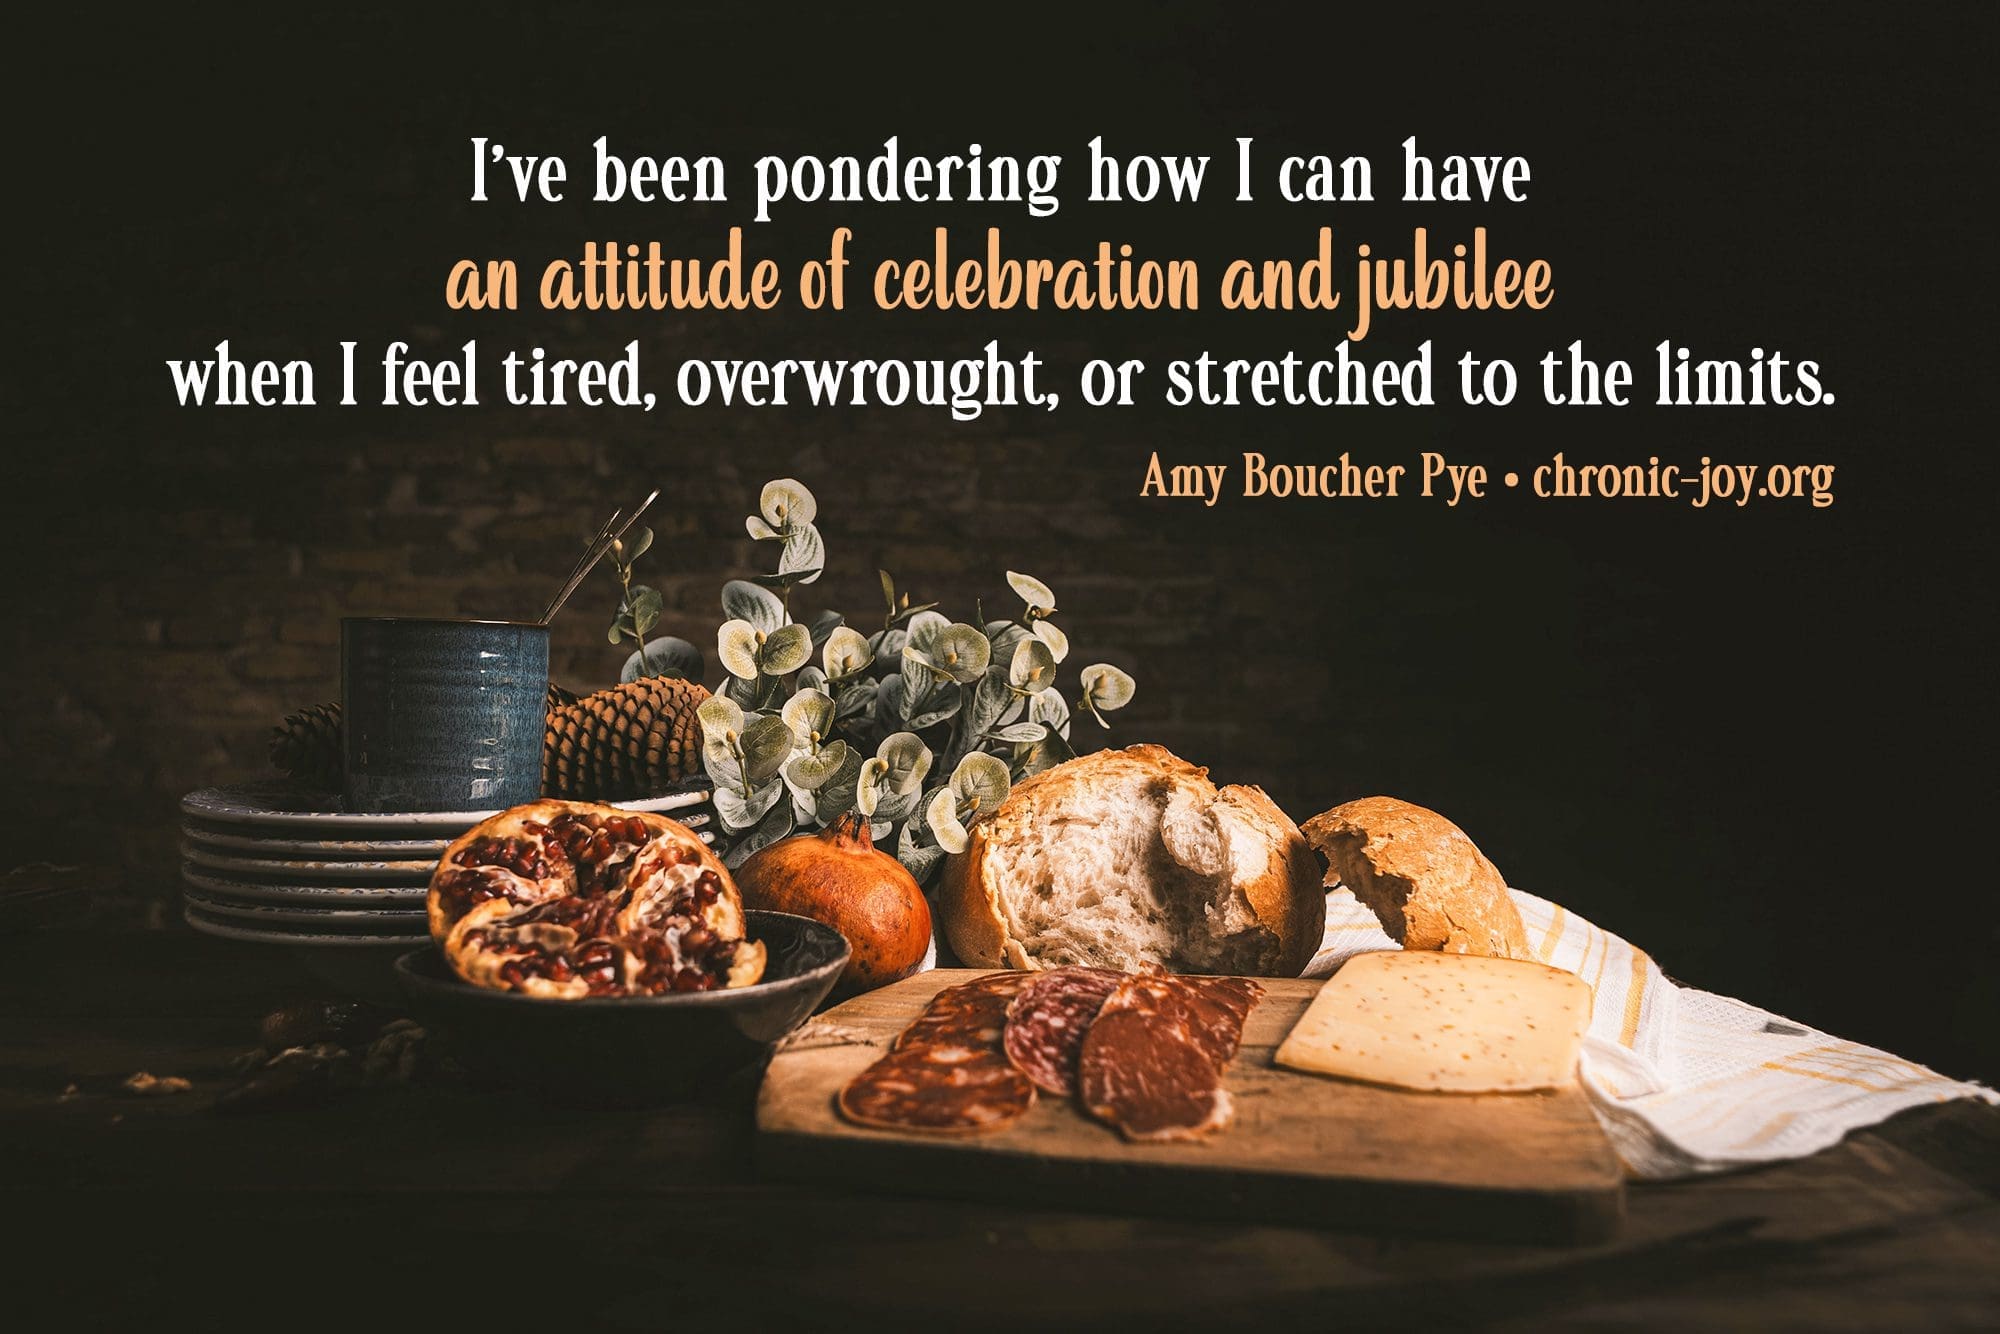 "I've been pondering how I can have an attitude of celebration and jubilee when I feel tired, overwrought, or stretched to the limits." Amy Boucher Pye